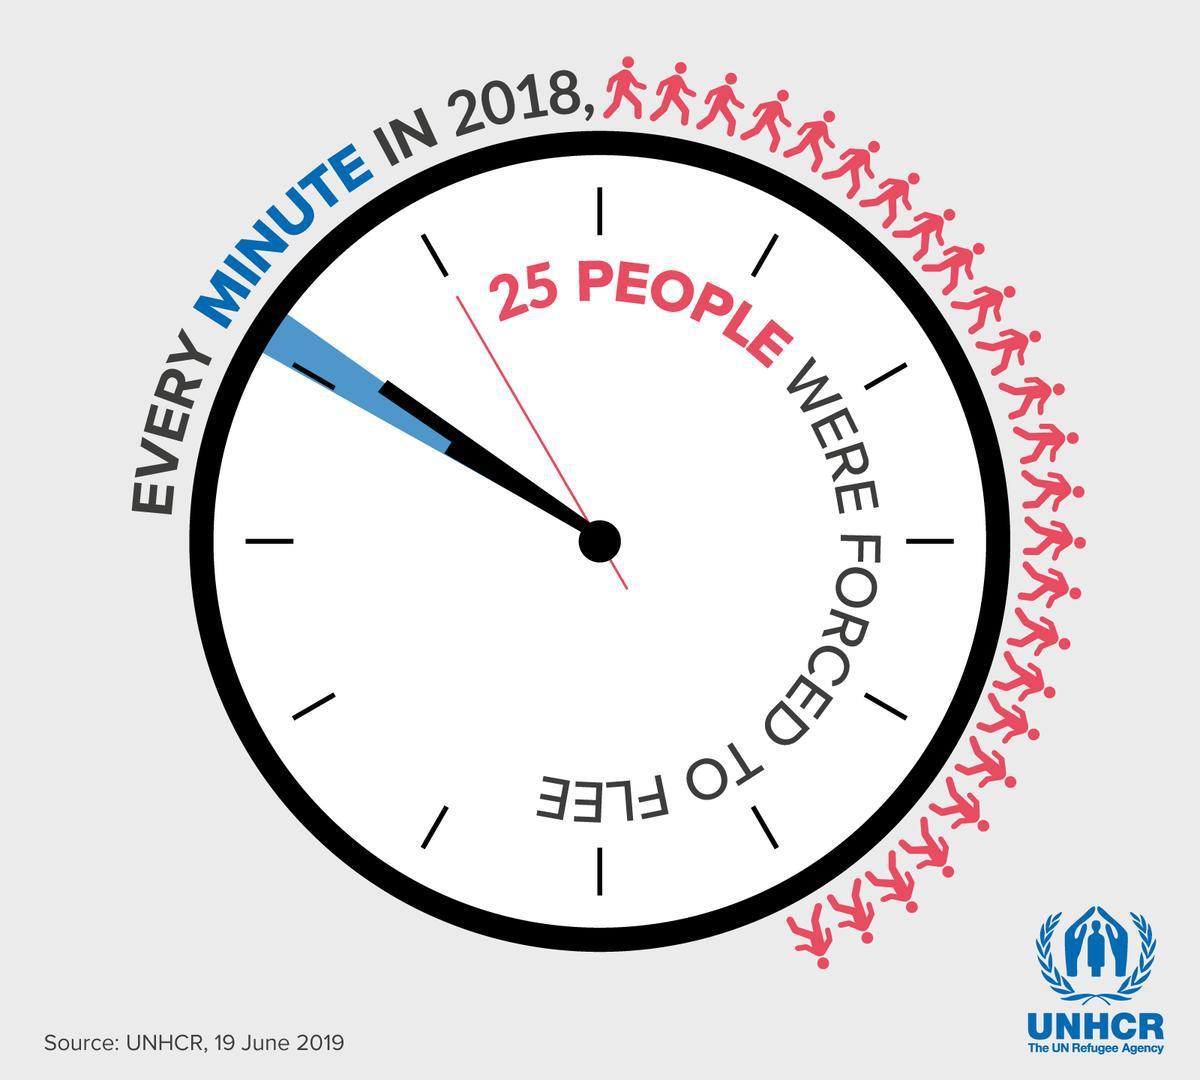 70+ million people have been forced to flee their homes.
50% of them are children.
84% of them are hosted by developing countries.
On Thursday’s World Refugee Day, and every day, show you stand with the 70+ million refugees worldwide:...